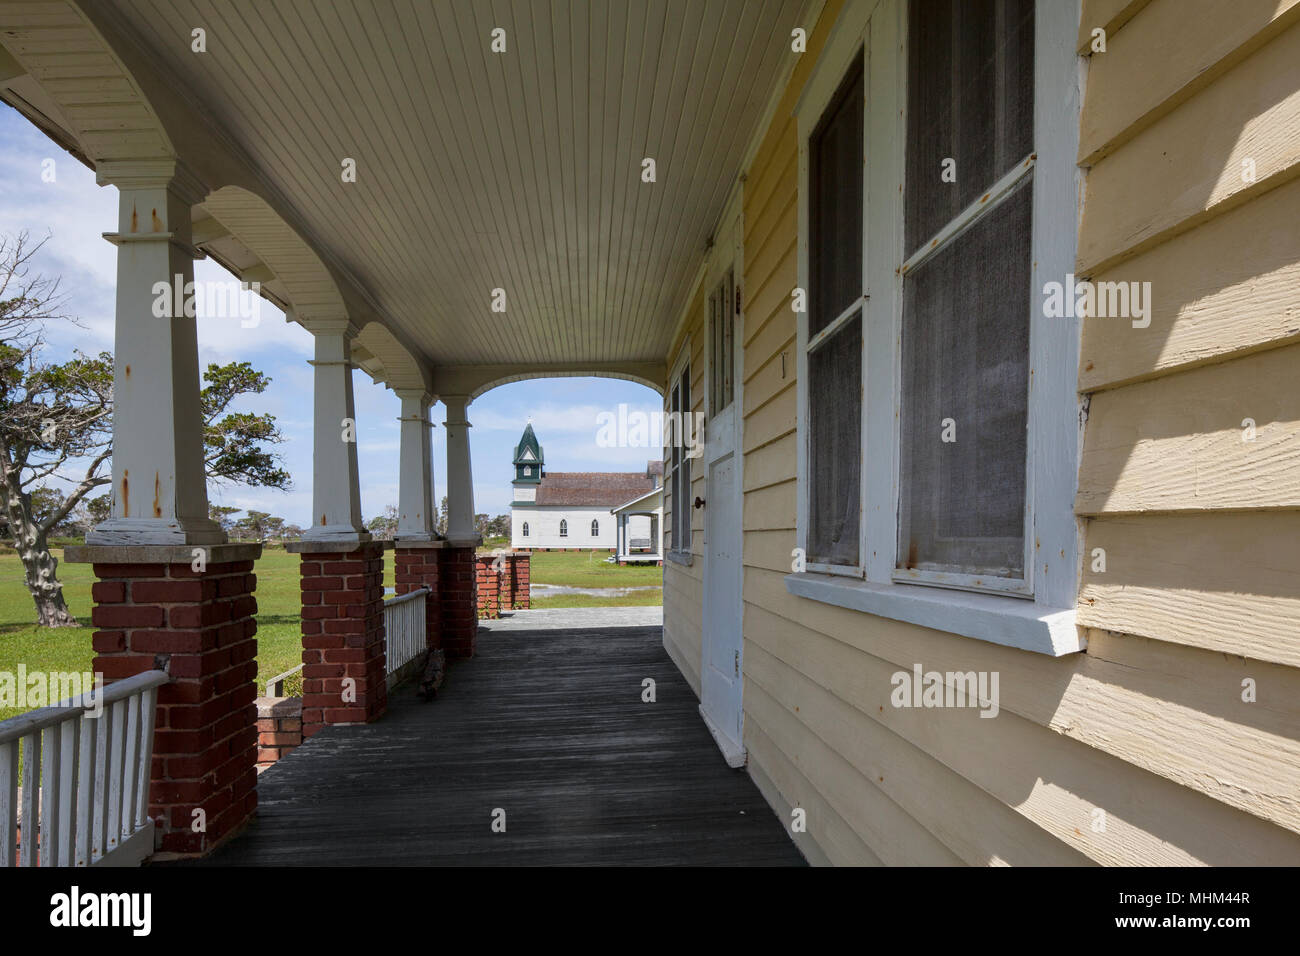 NC01597-00...NORTH CAROLINA - Front porch and church in the historical town of Portsmouth, Cape Lookout National seashore. Stock Photo